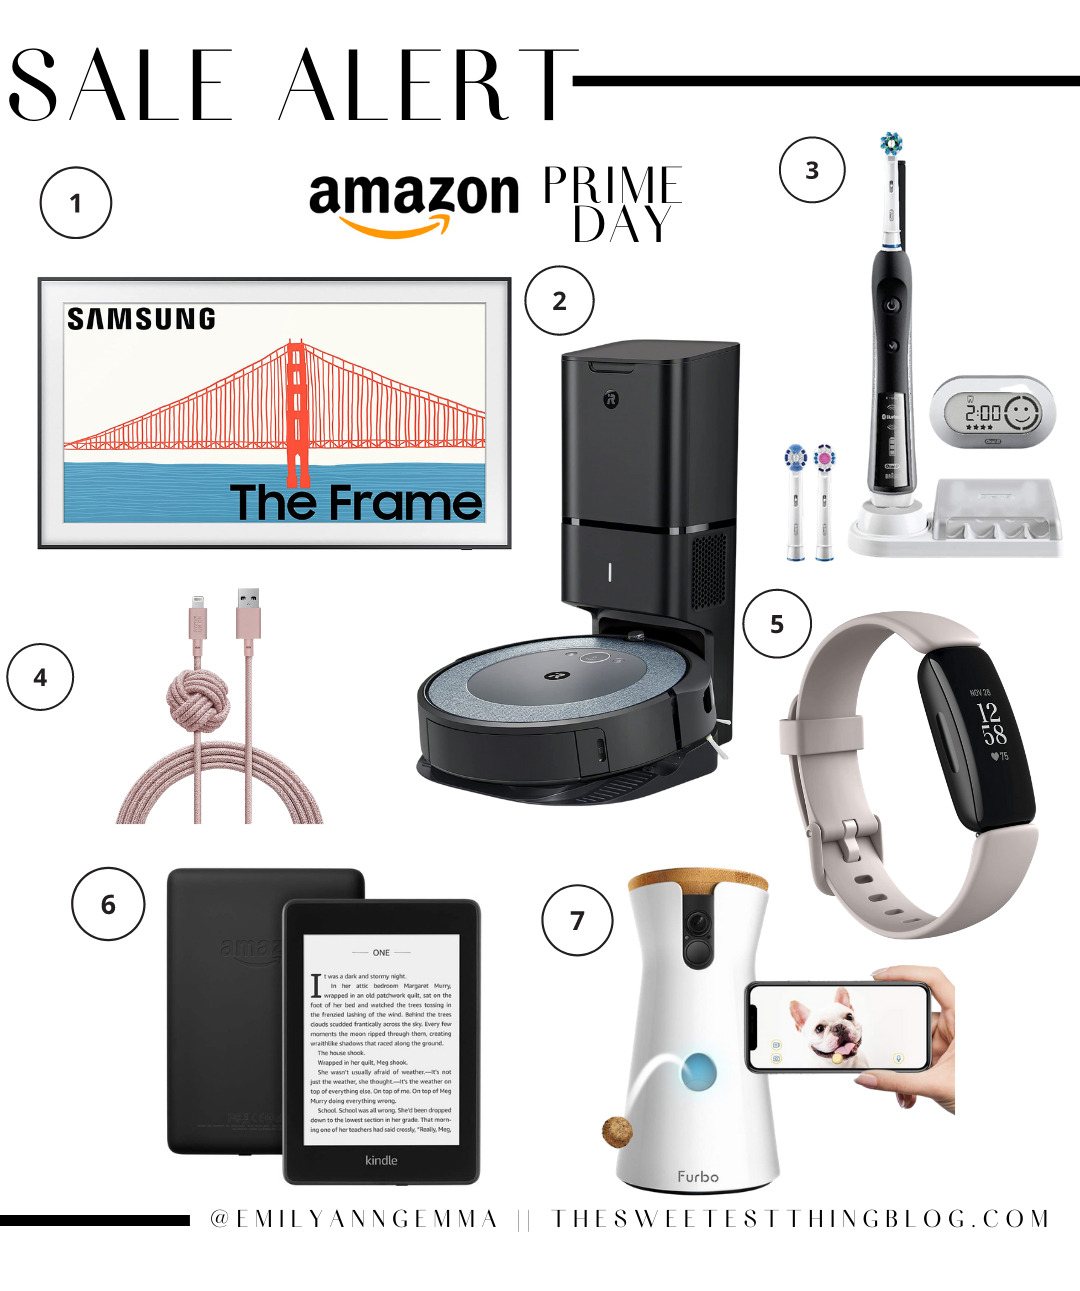 Amazon Prime Day by popular US life and Style blog, The Sweetest Thing: collage image of a Samsung the frame t.v., fit bit, electric toothbrush, charging cord, Furbo treat feeder, Kindle, and Roomba vacuum. 